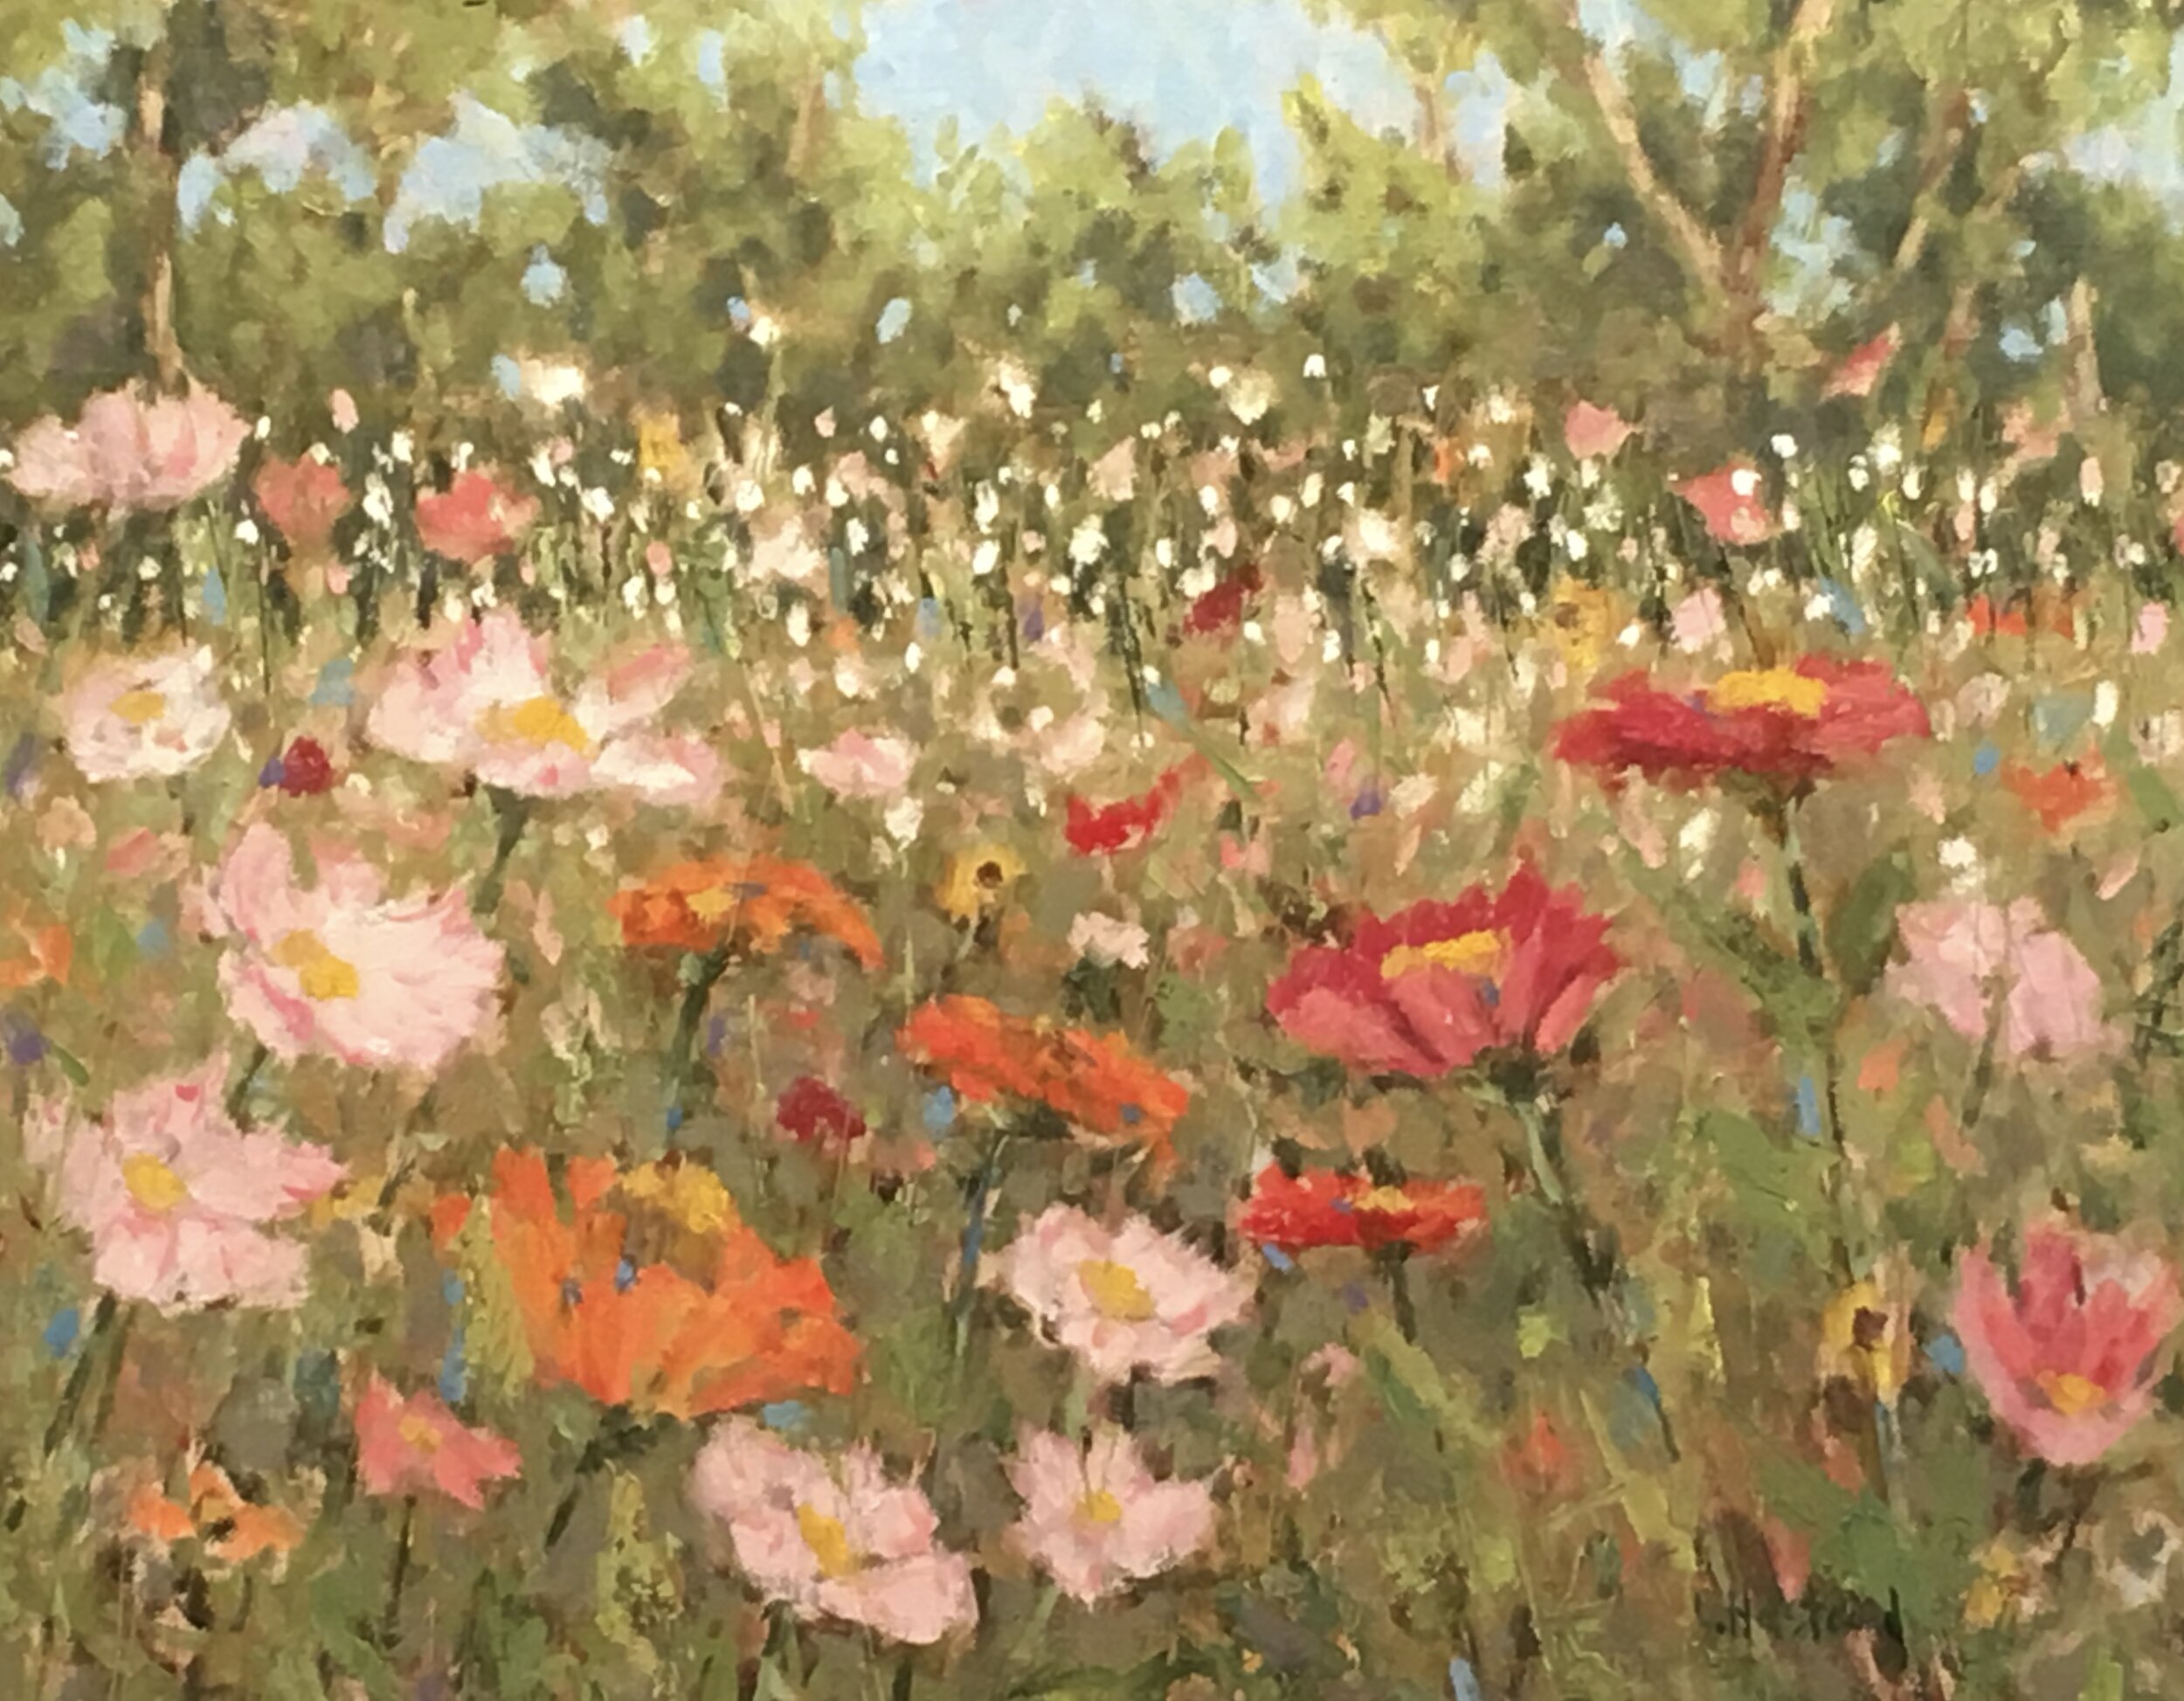 A Chorus of Flowers, oil on linen, 11 x 14, sold